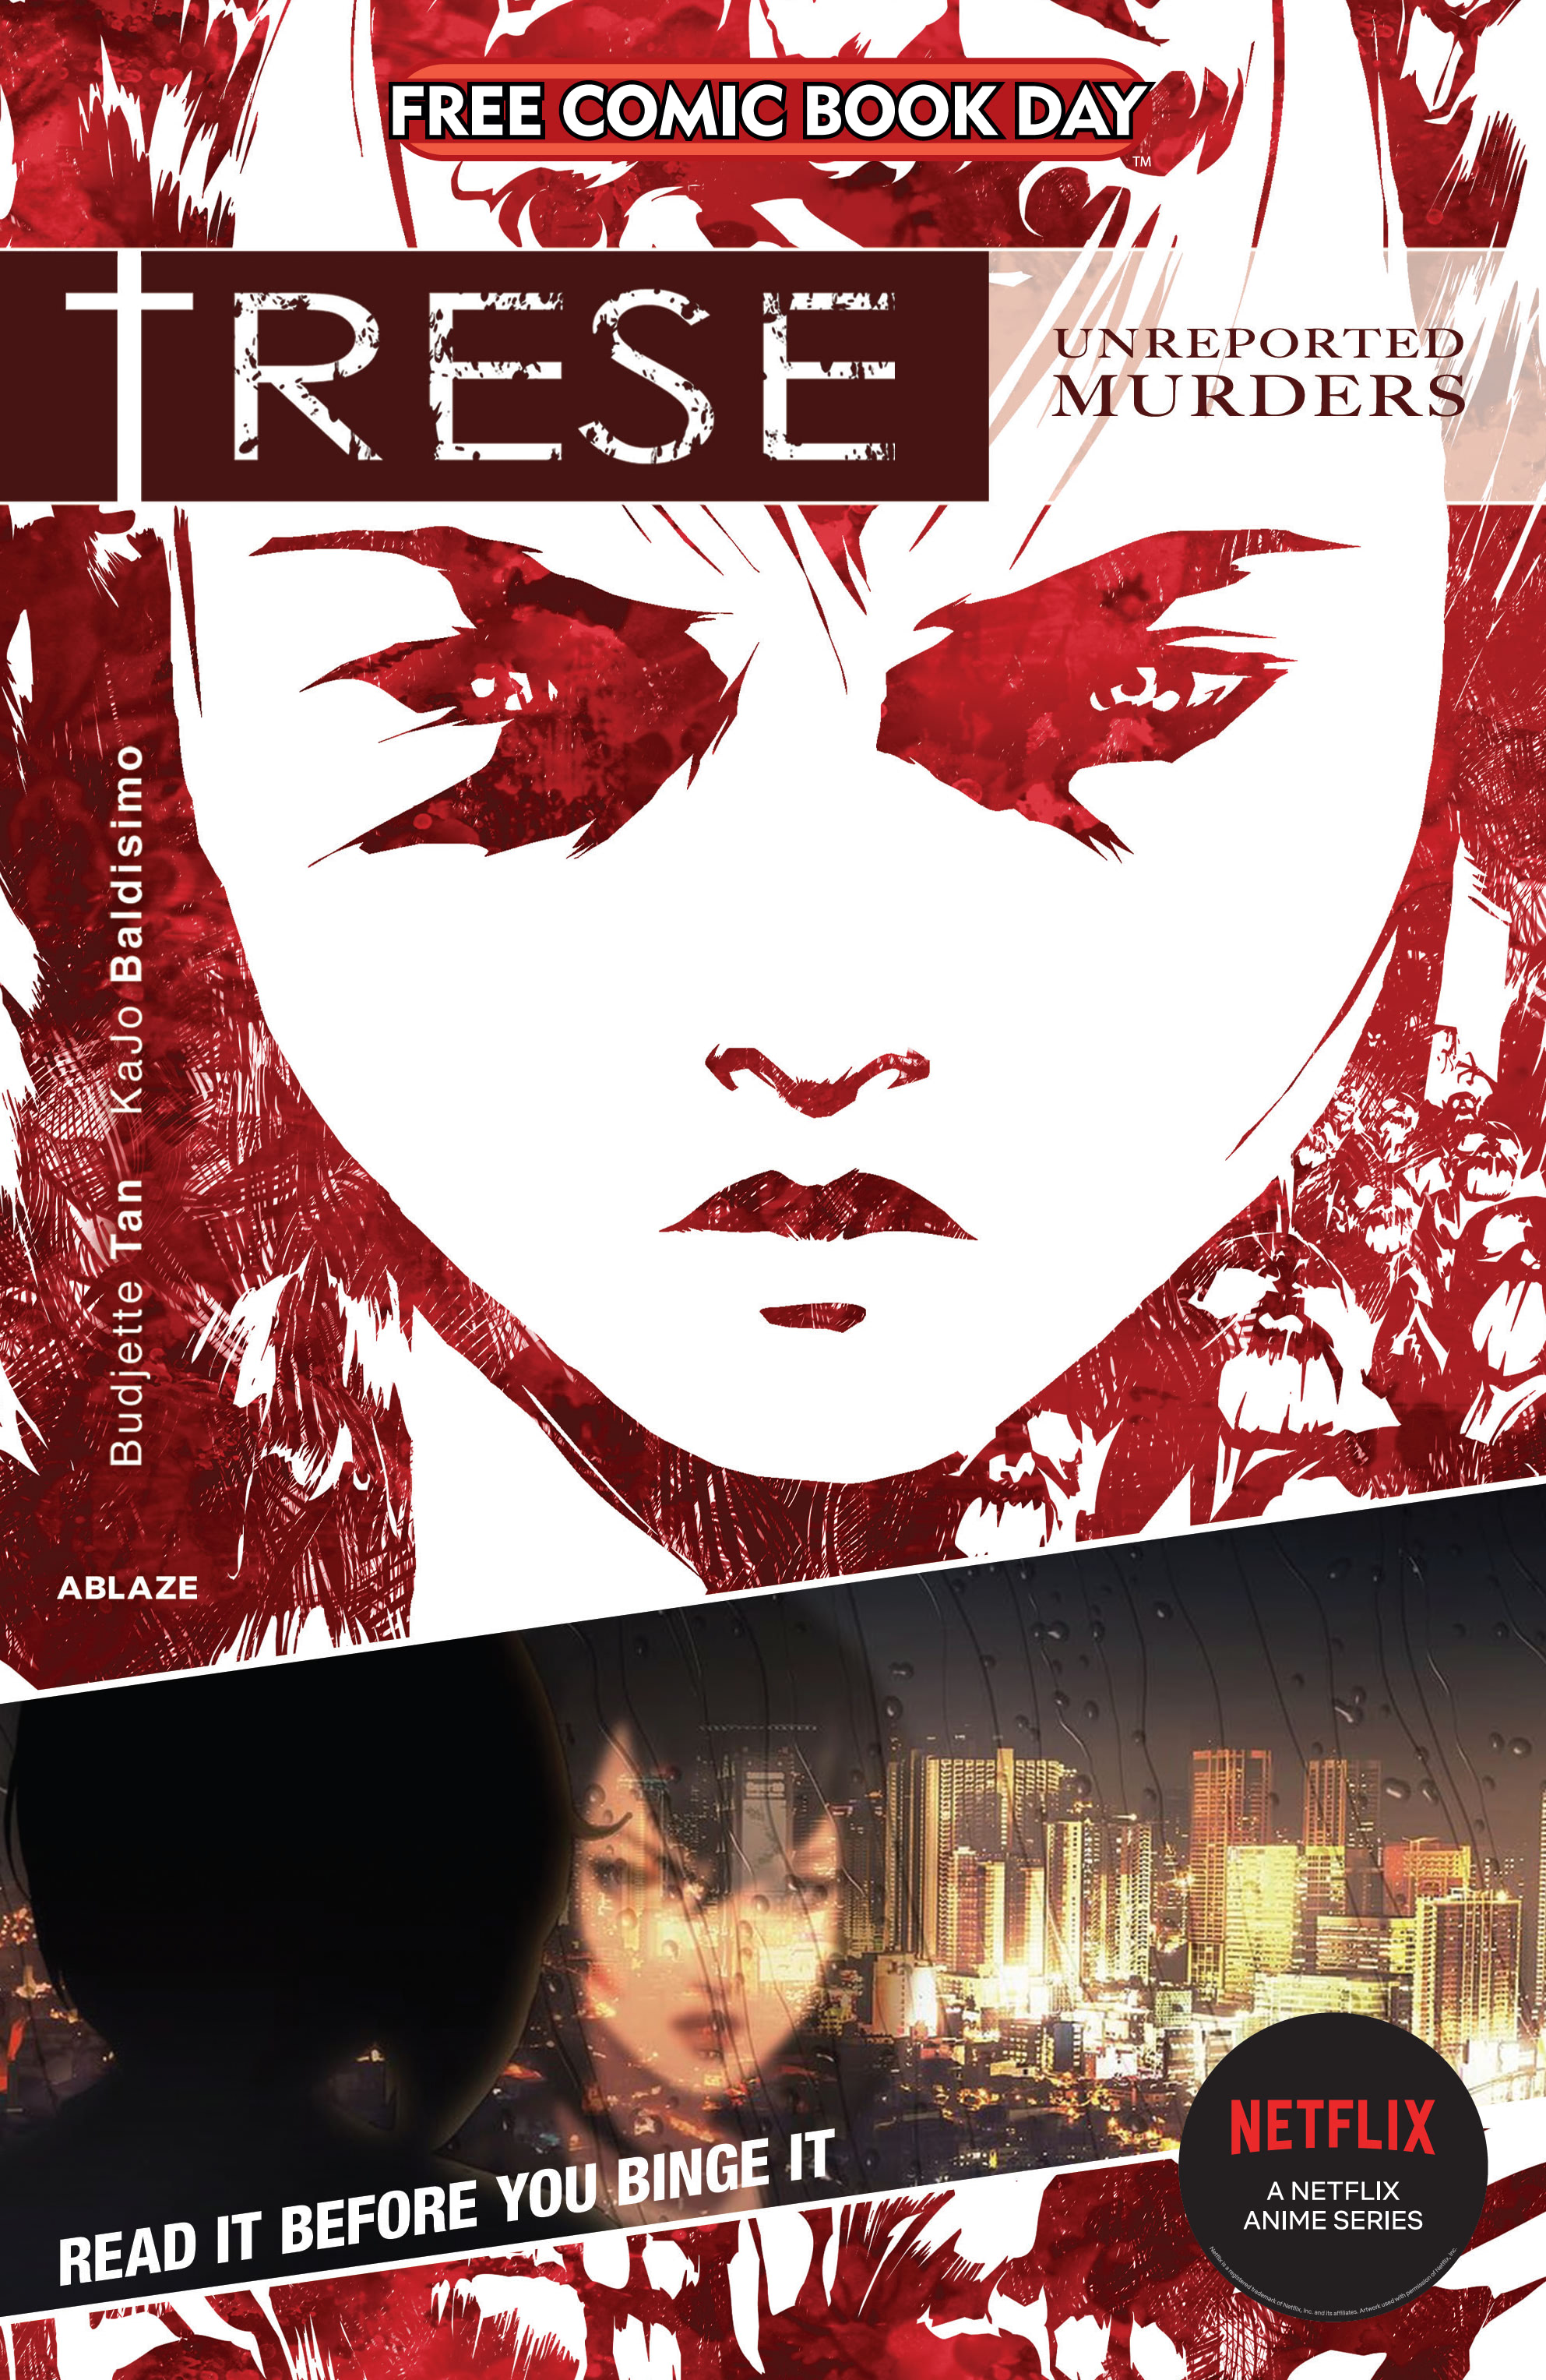 Read online Free Comic Book Day 2021 comic -  Issue # Trese - Unreported Murders - 1